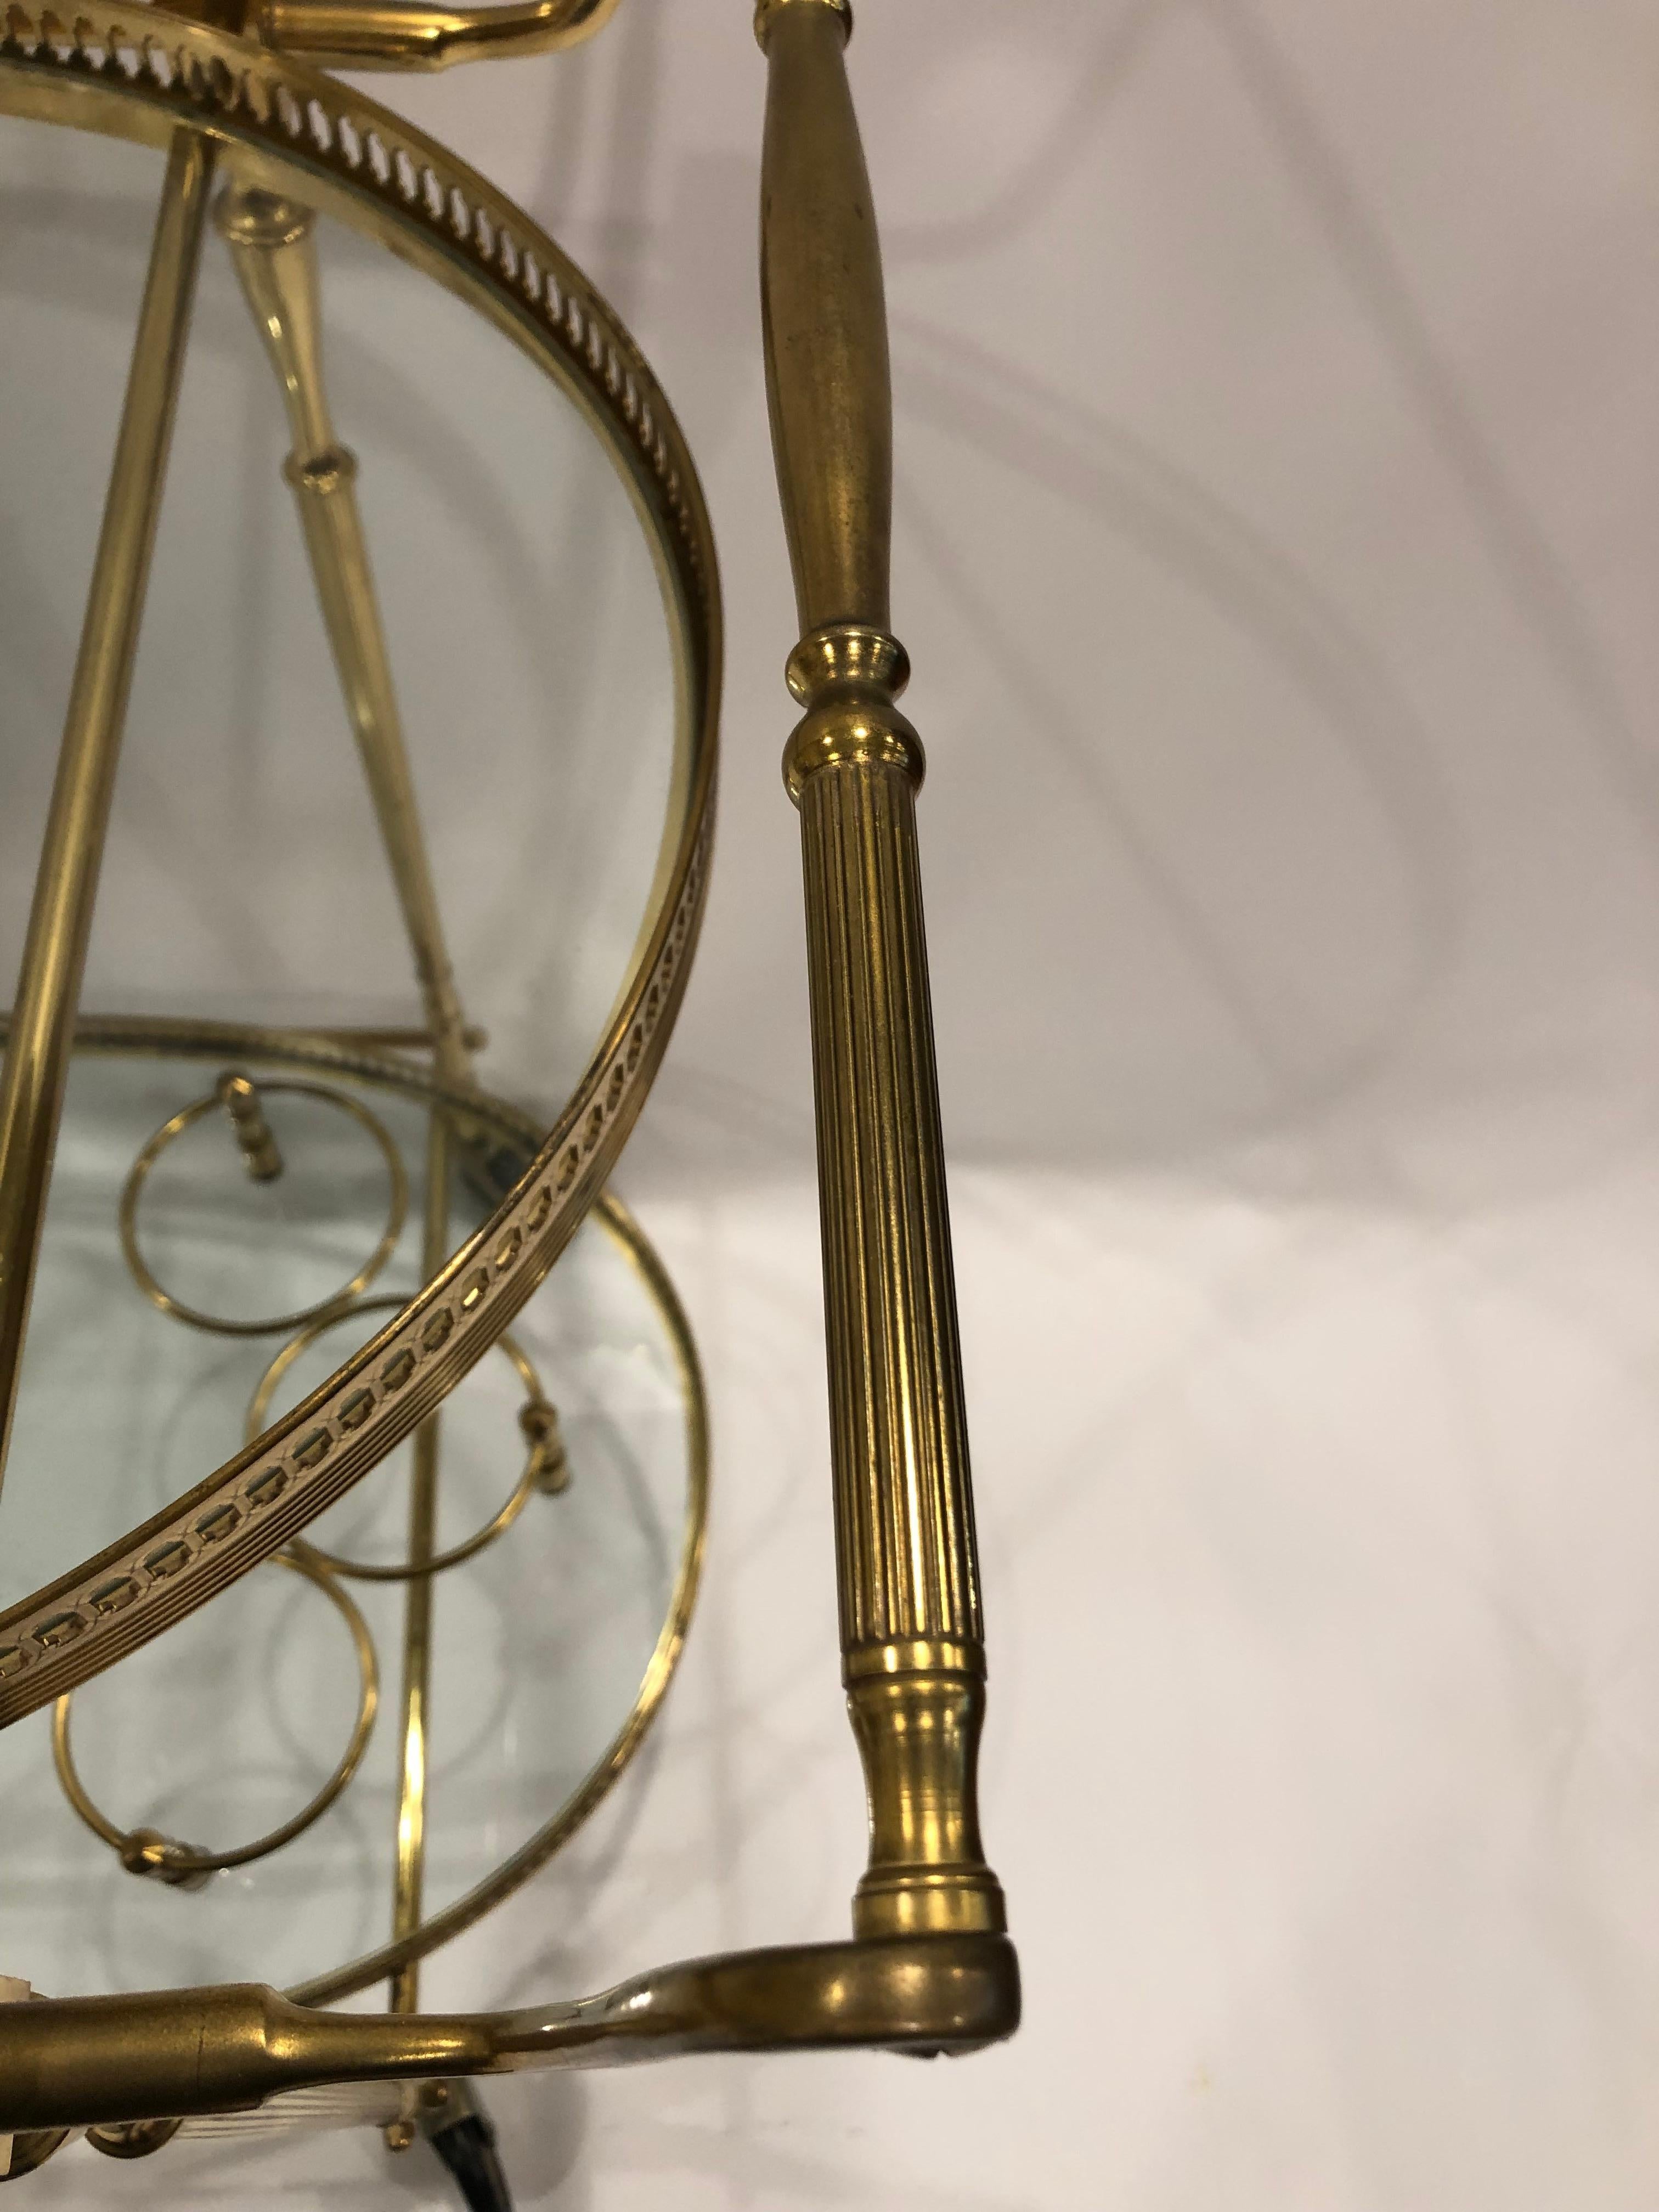 Classically elegant vintage brass bar cart having two oval tiers with pierced galleries, bottle holder, and smoothly functioning pretty wheels.